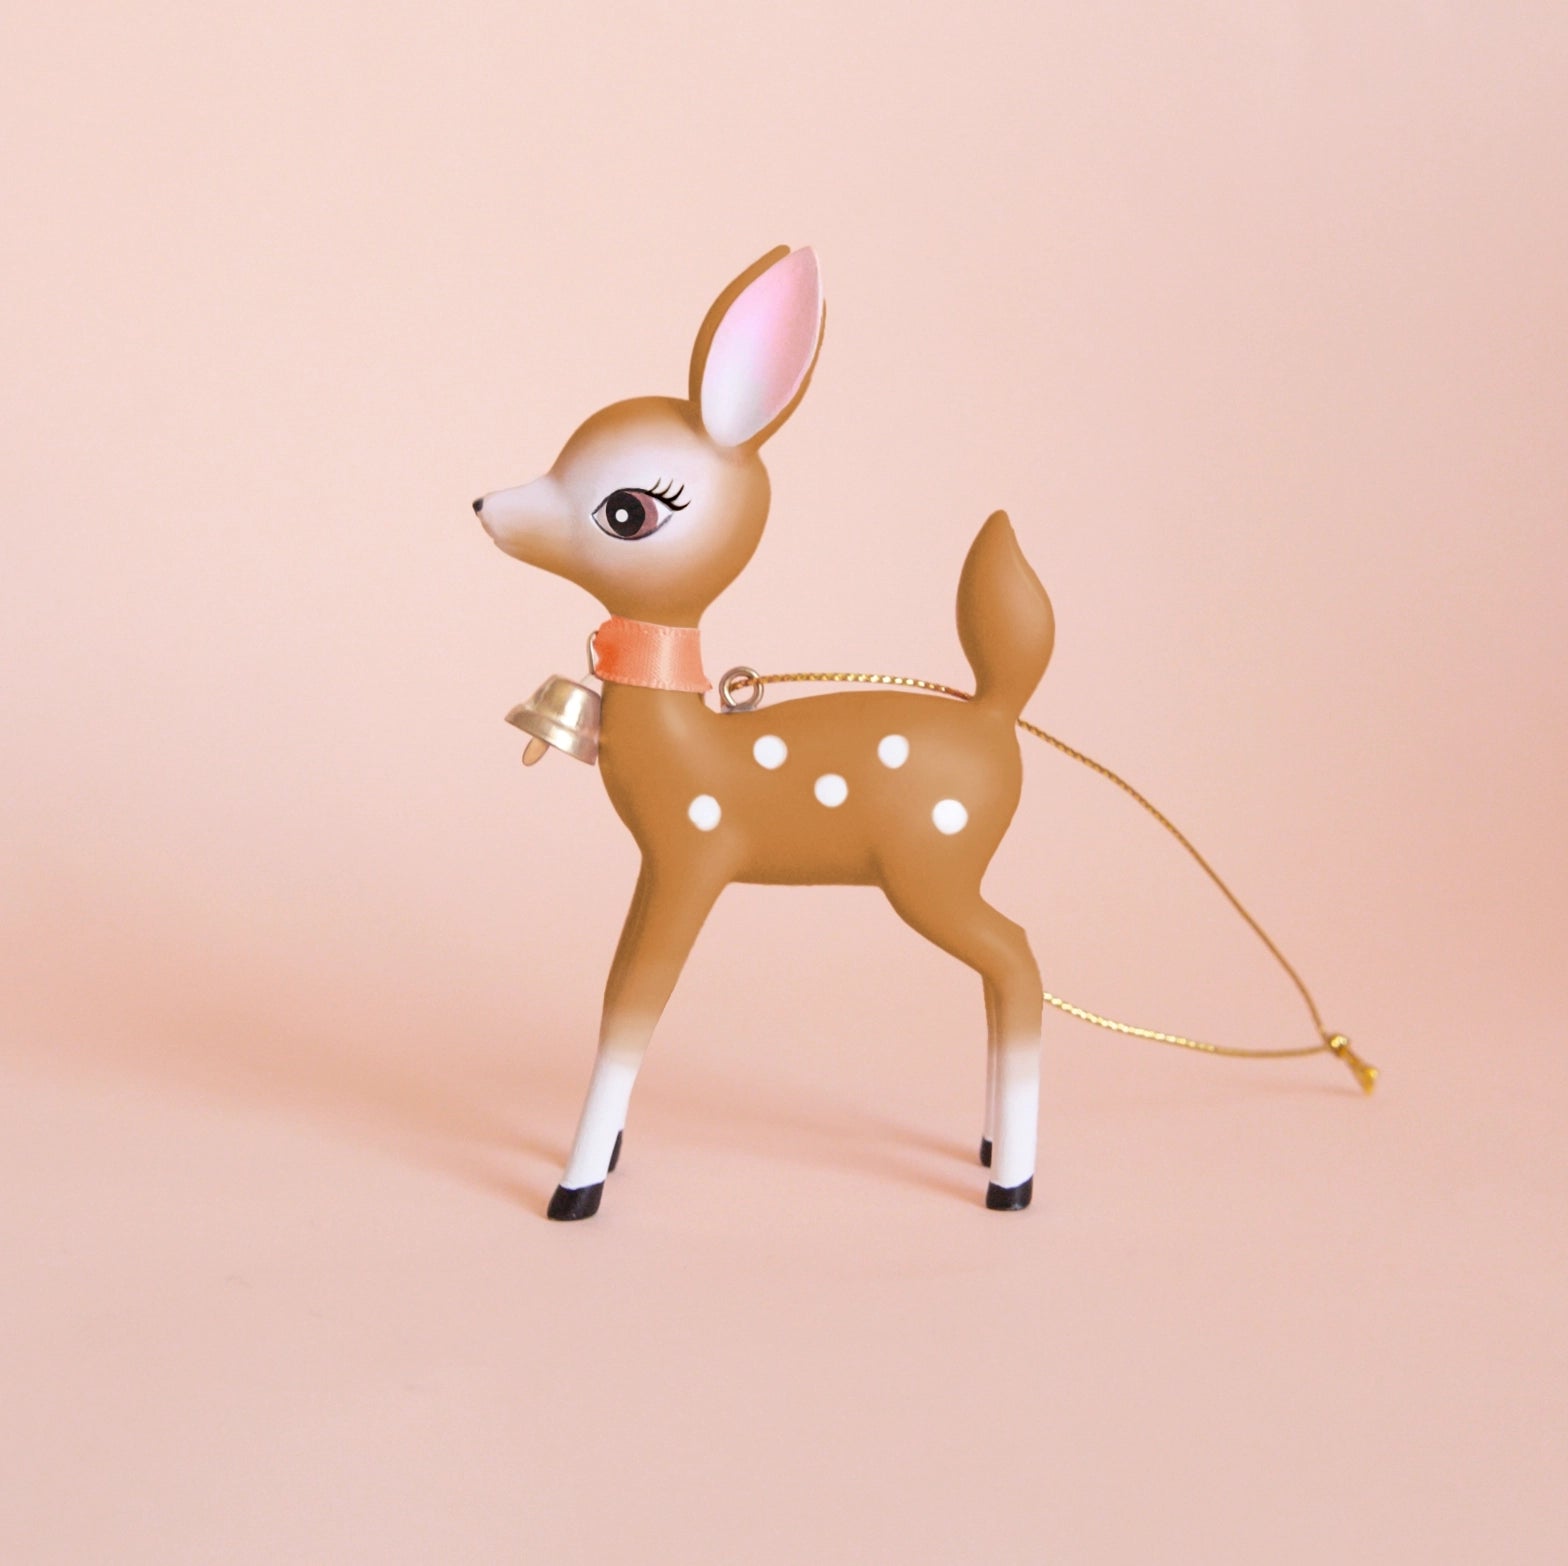 On a peachy background is a brown retro deer ornament with white details and spots and a gold bell on the front of its neck along with a gold string loop for hanging.